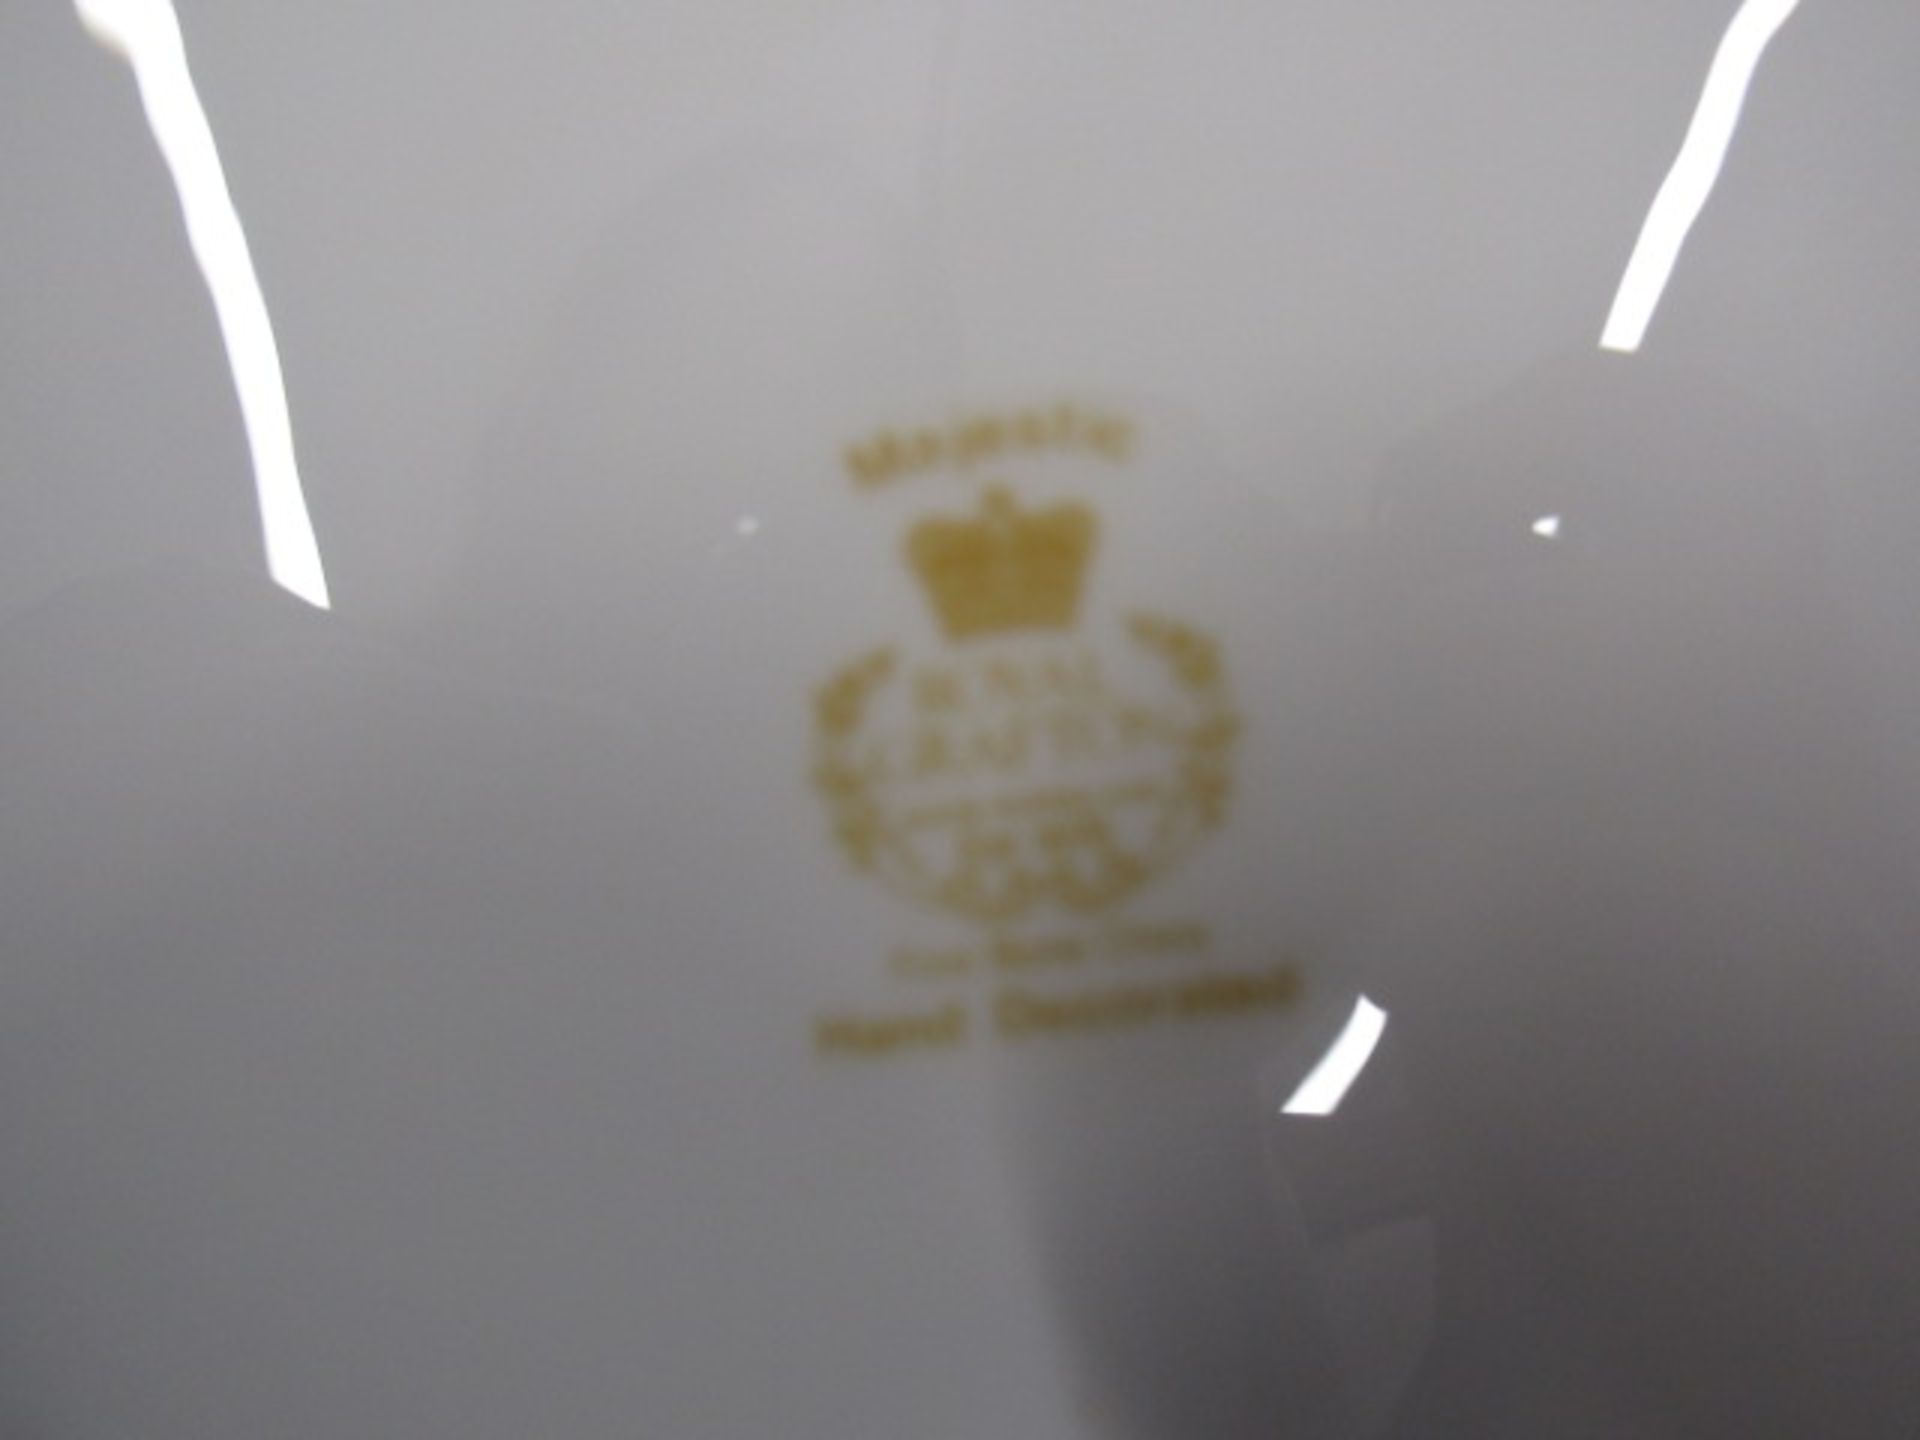 Royal Doulton 'Majestic' dinner service for 6 - Image 2 of 7